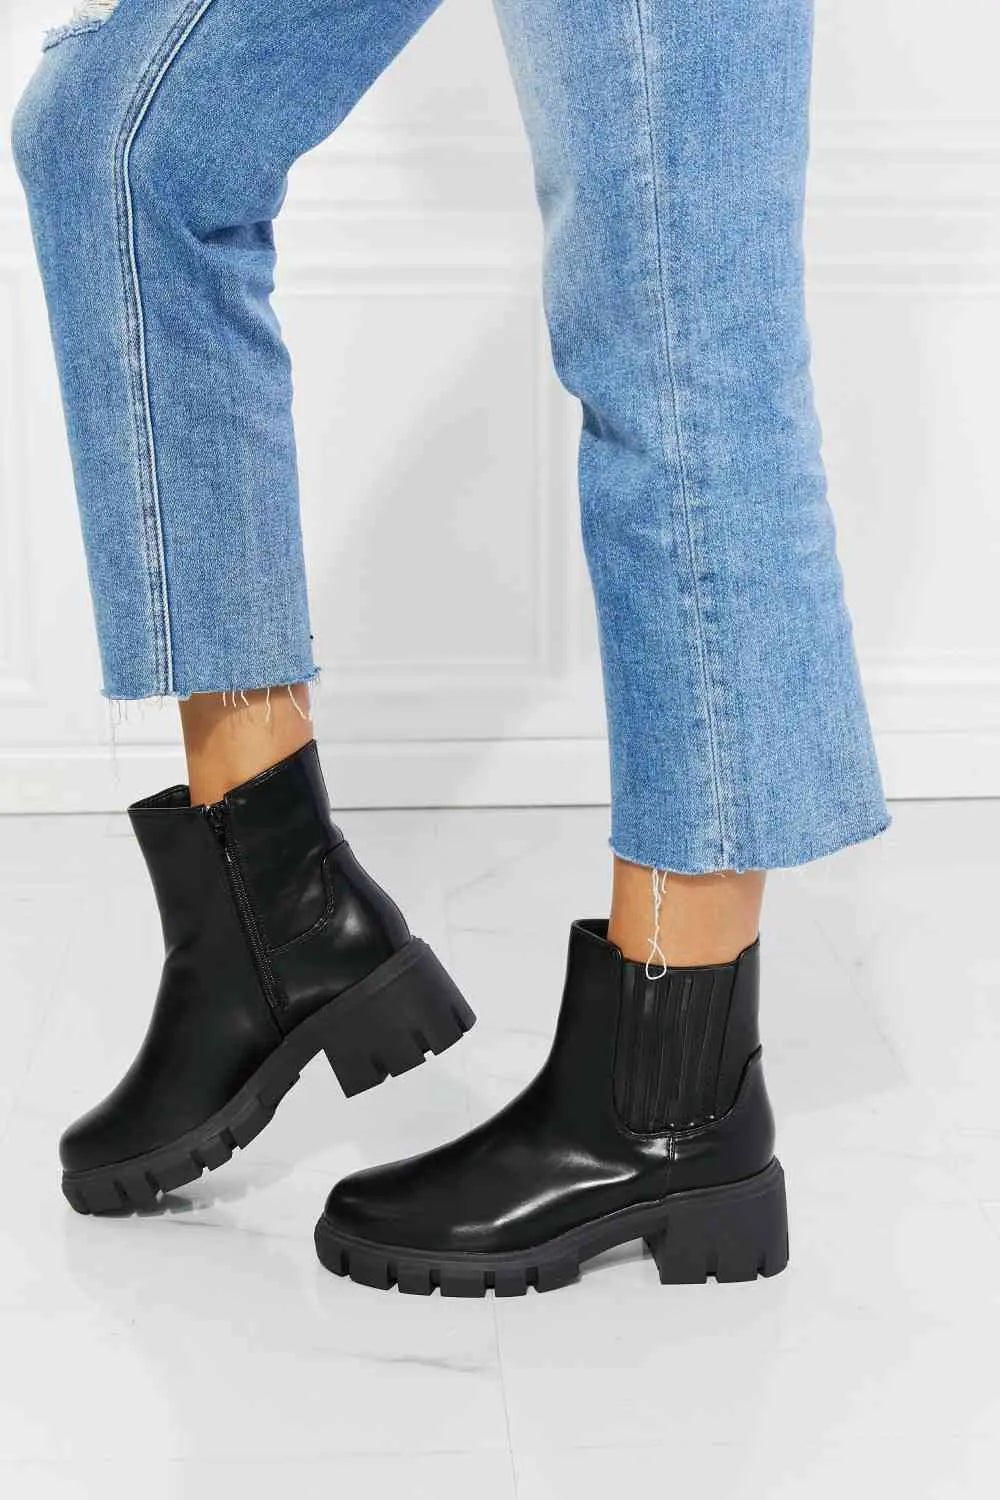 MMShoes What It Takes Lug Sole Chelsea Boots in Black - Image #2